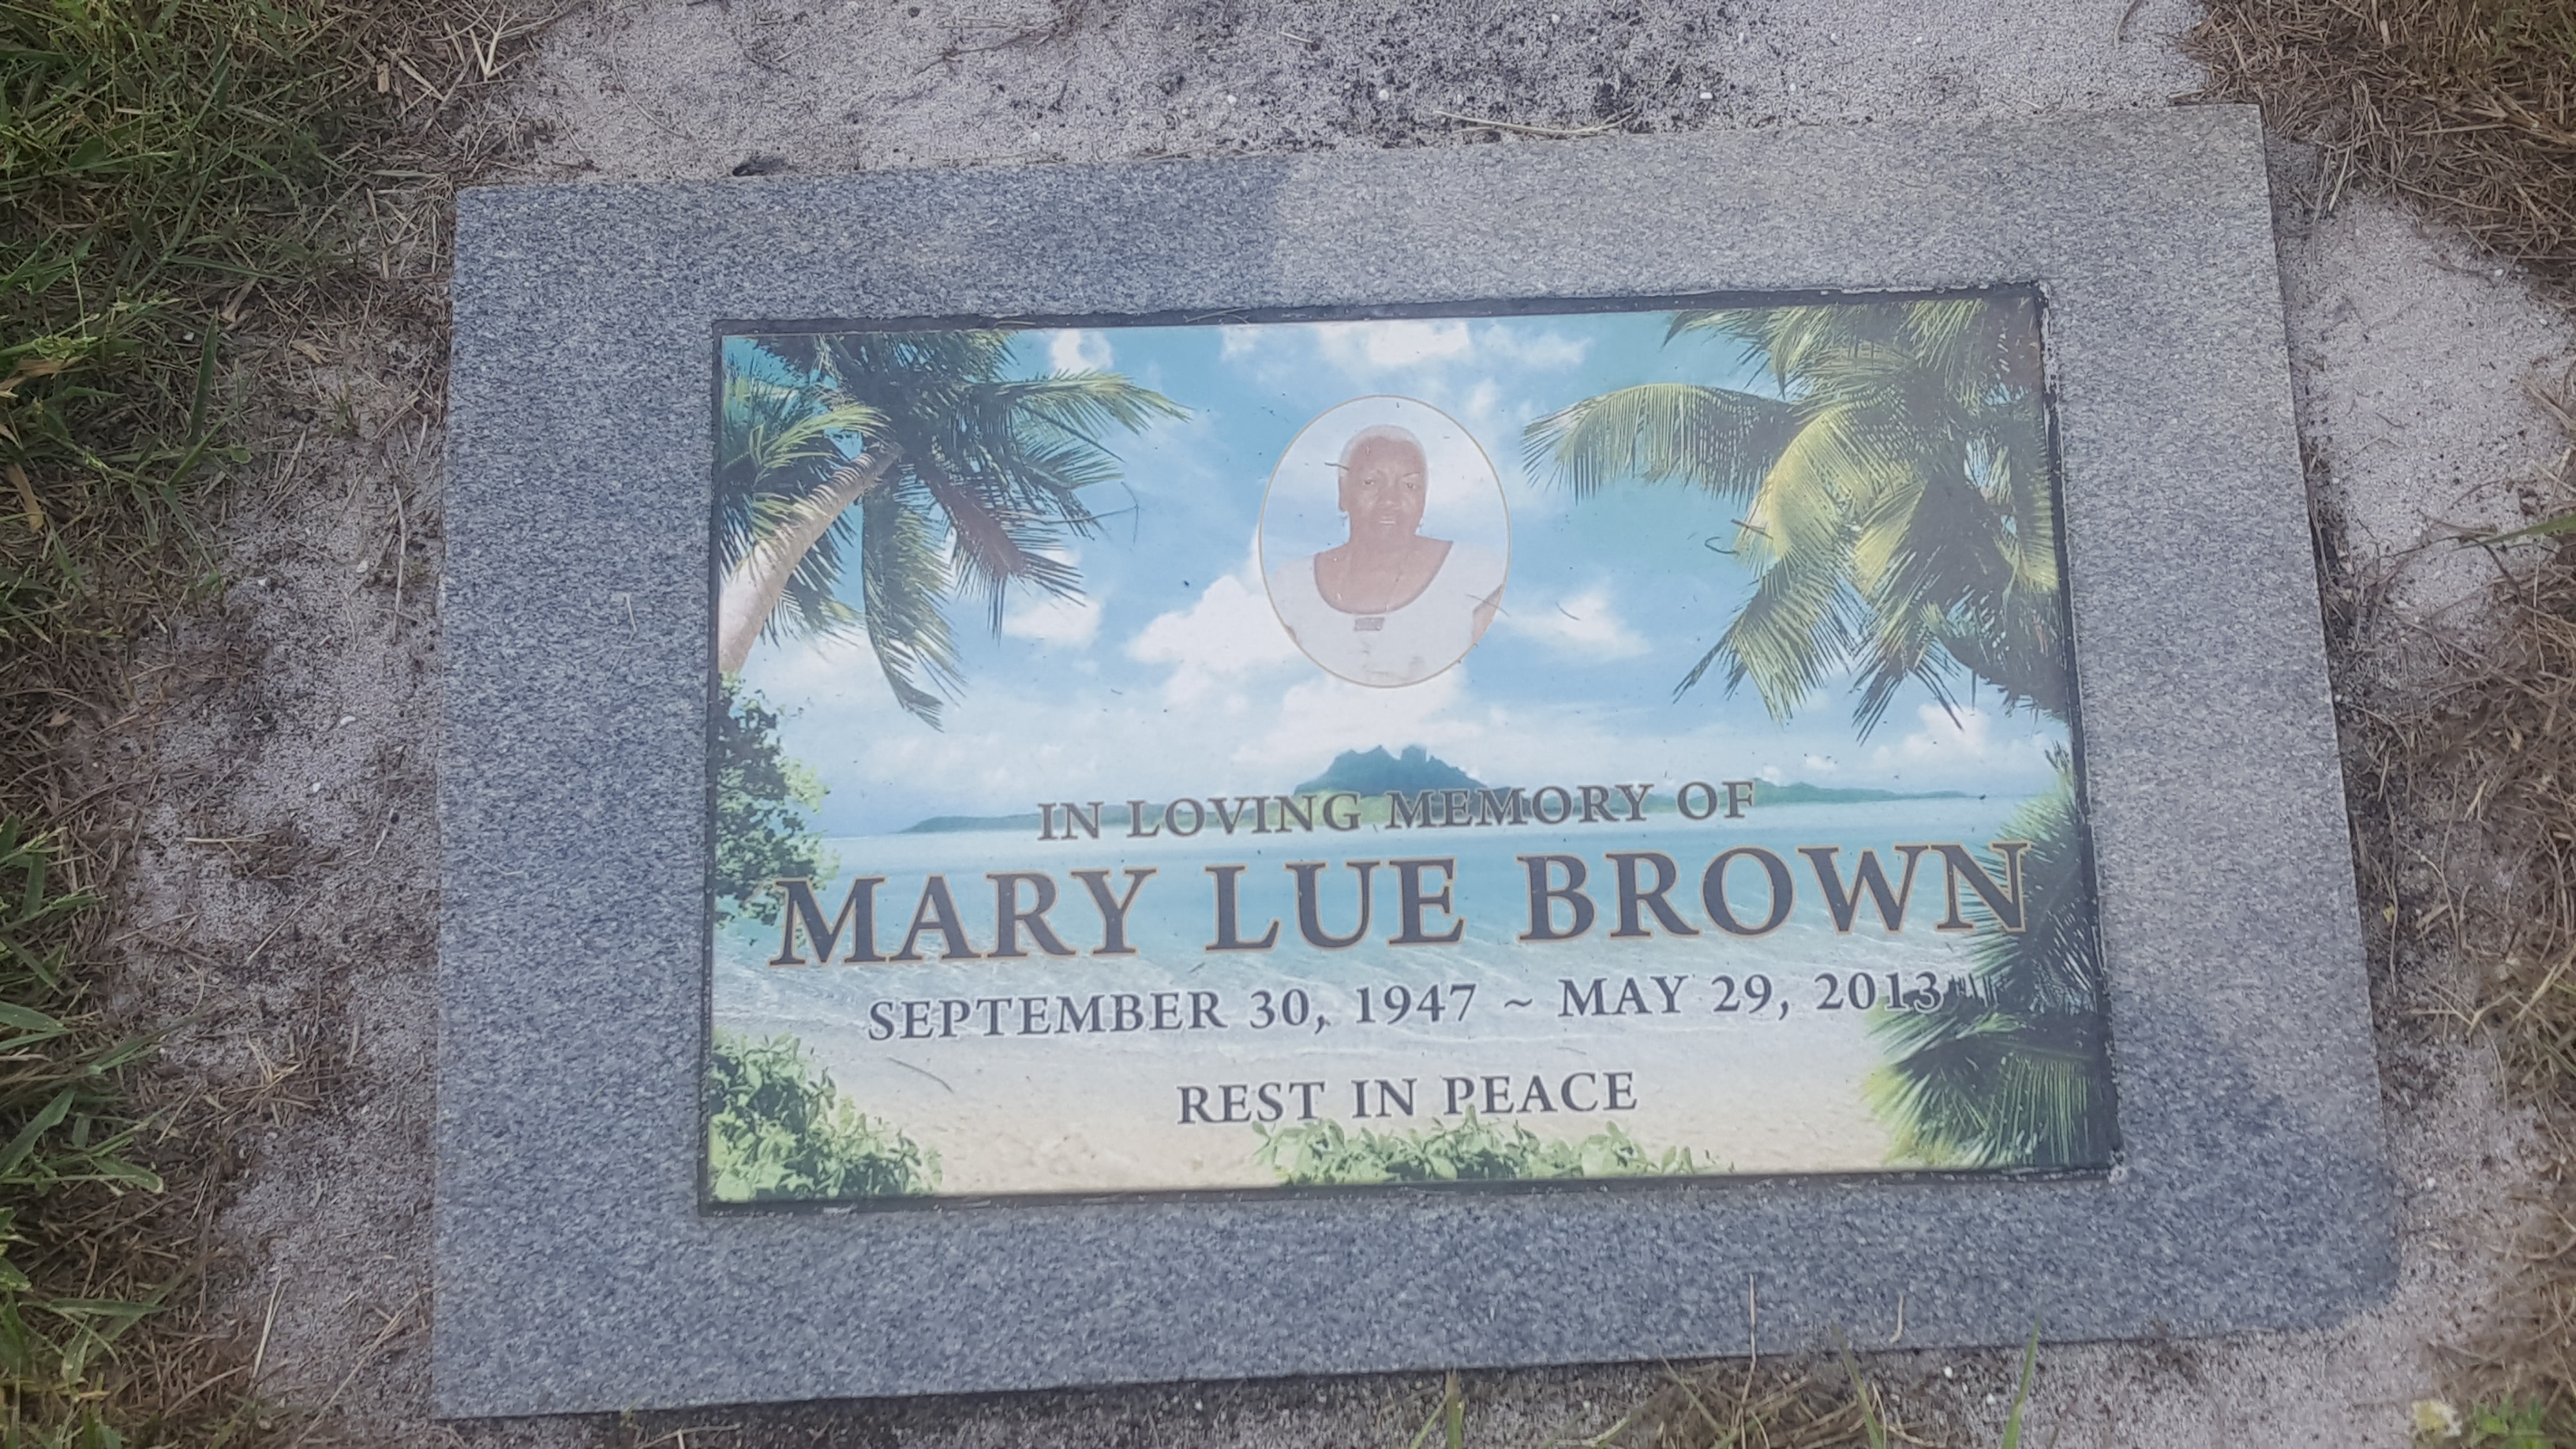 Mary Lue Brown